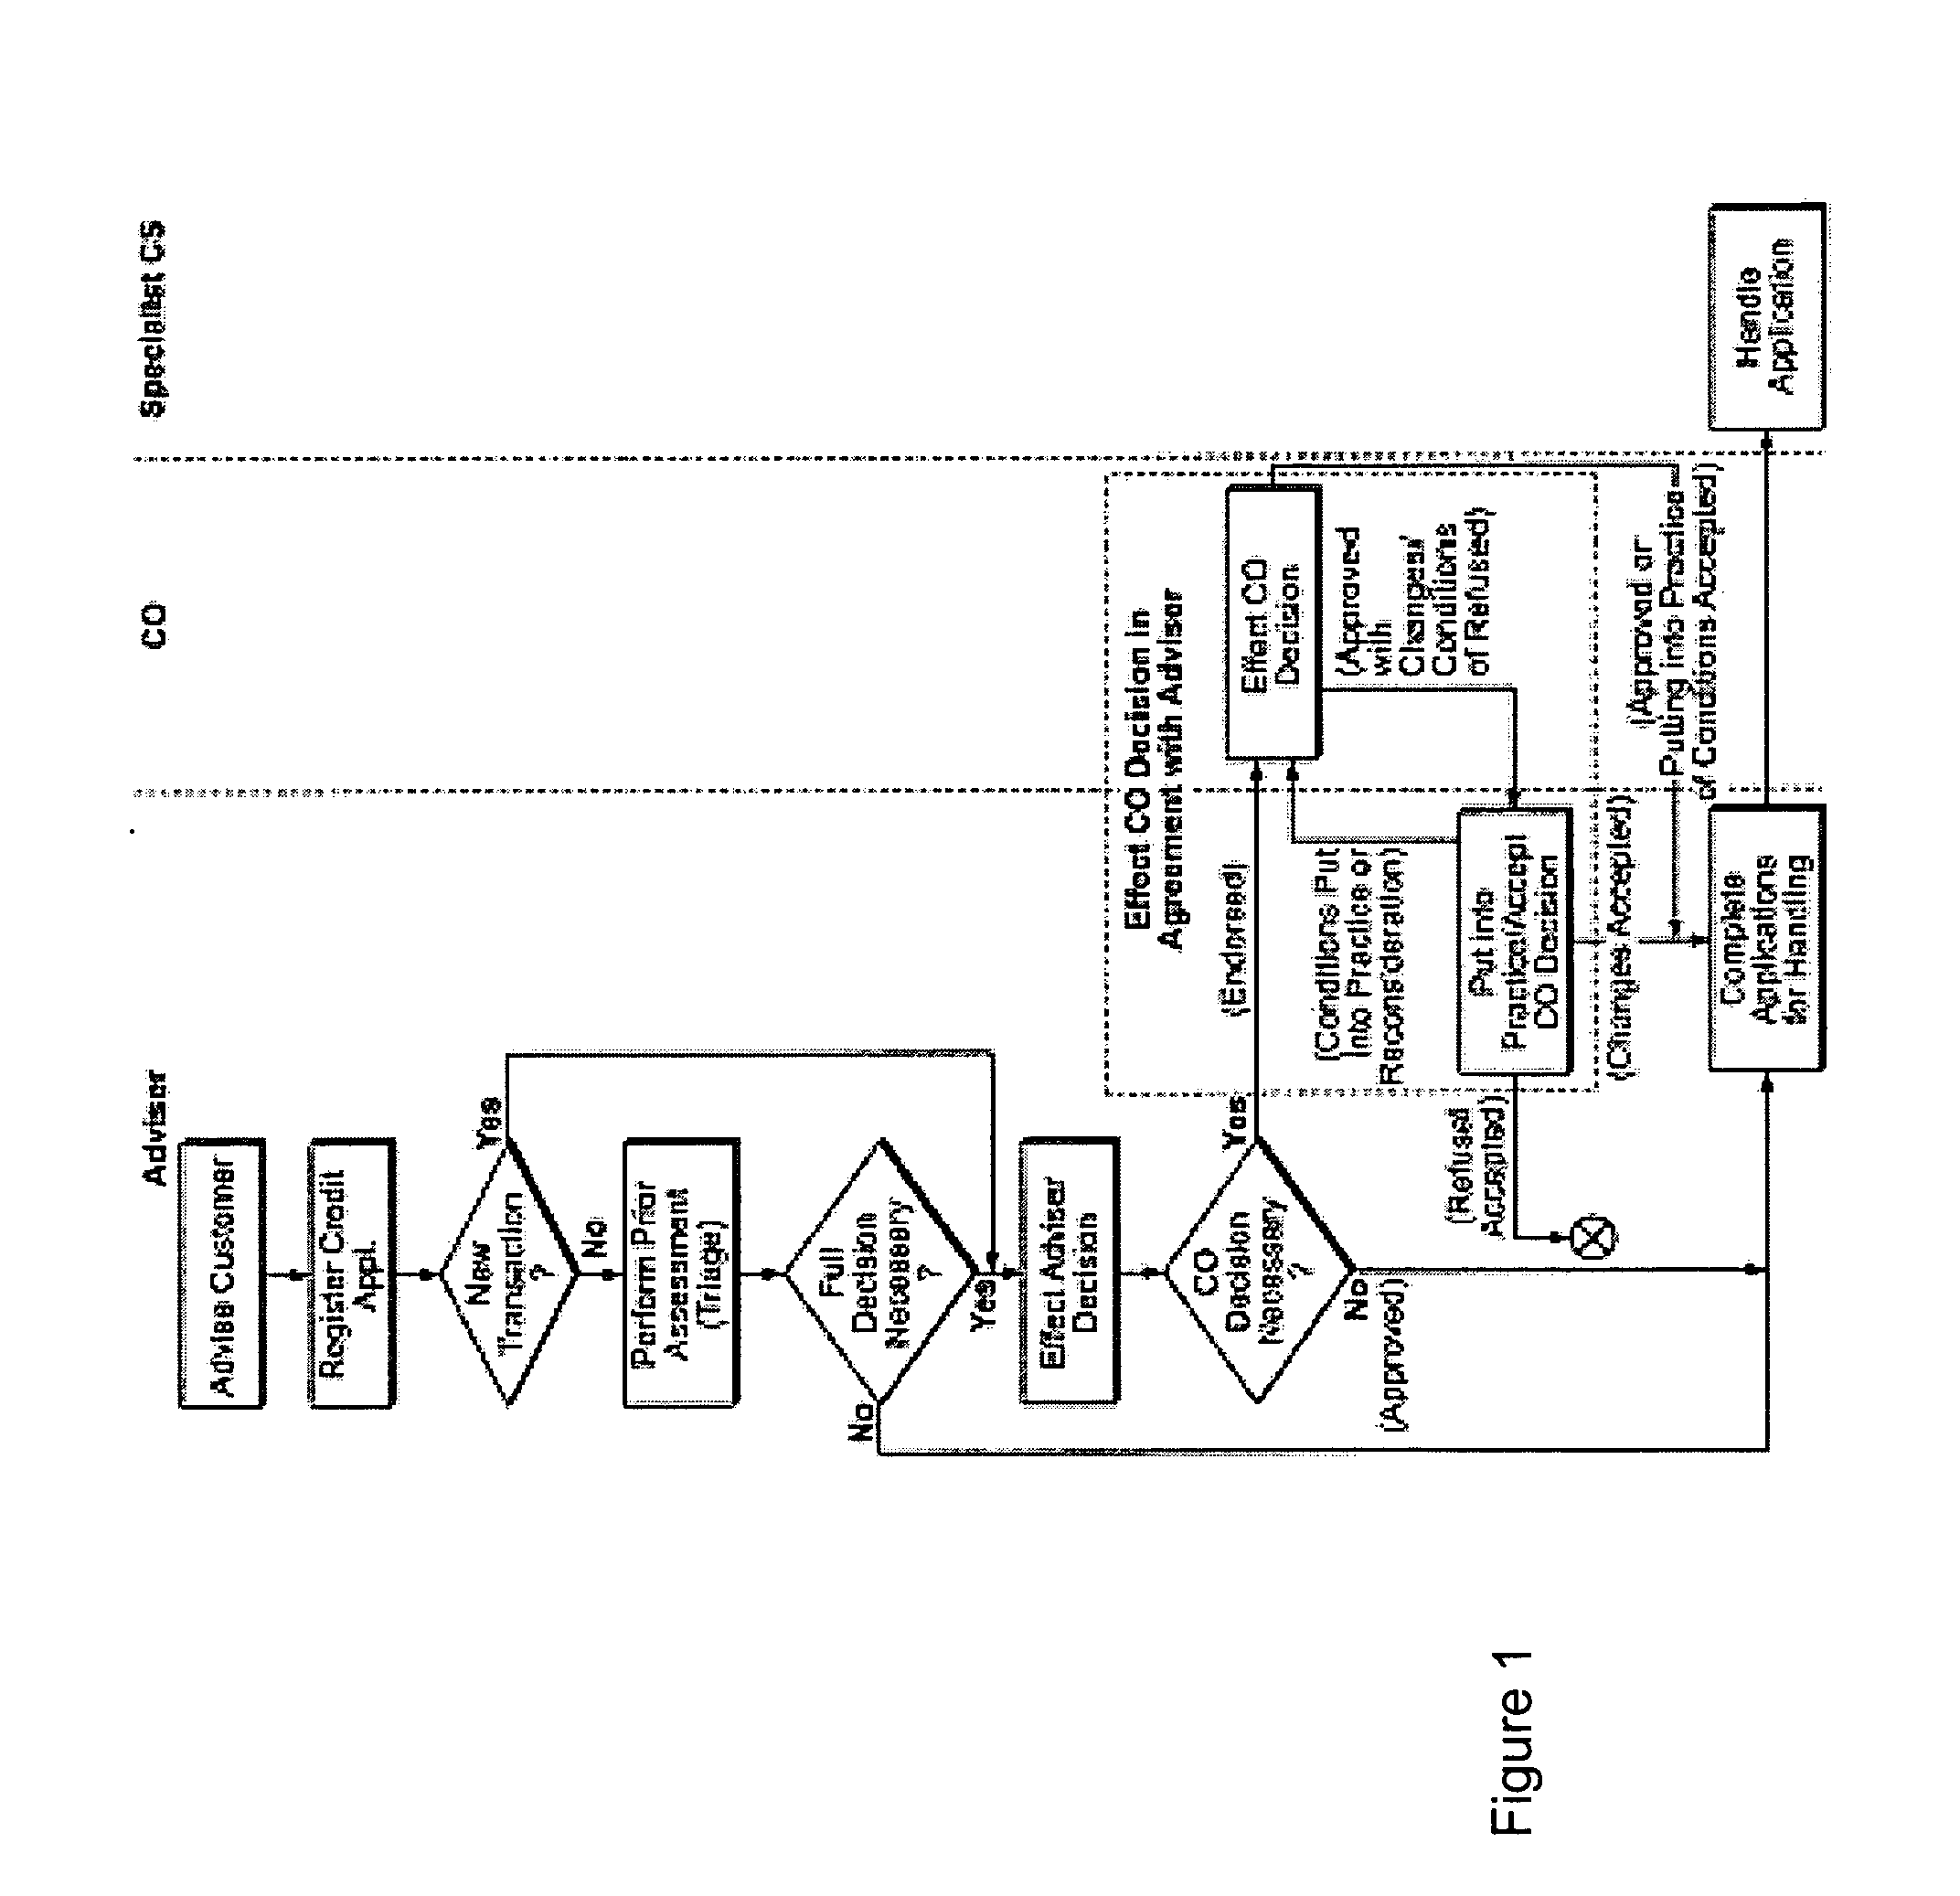 System and method for automatic evaluation of credit requests